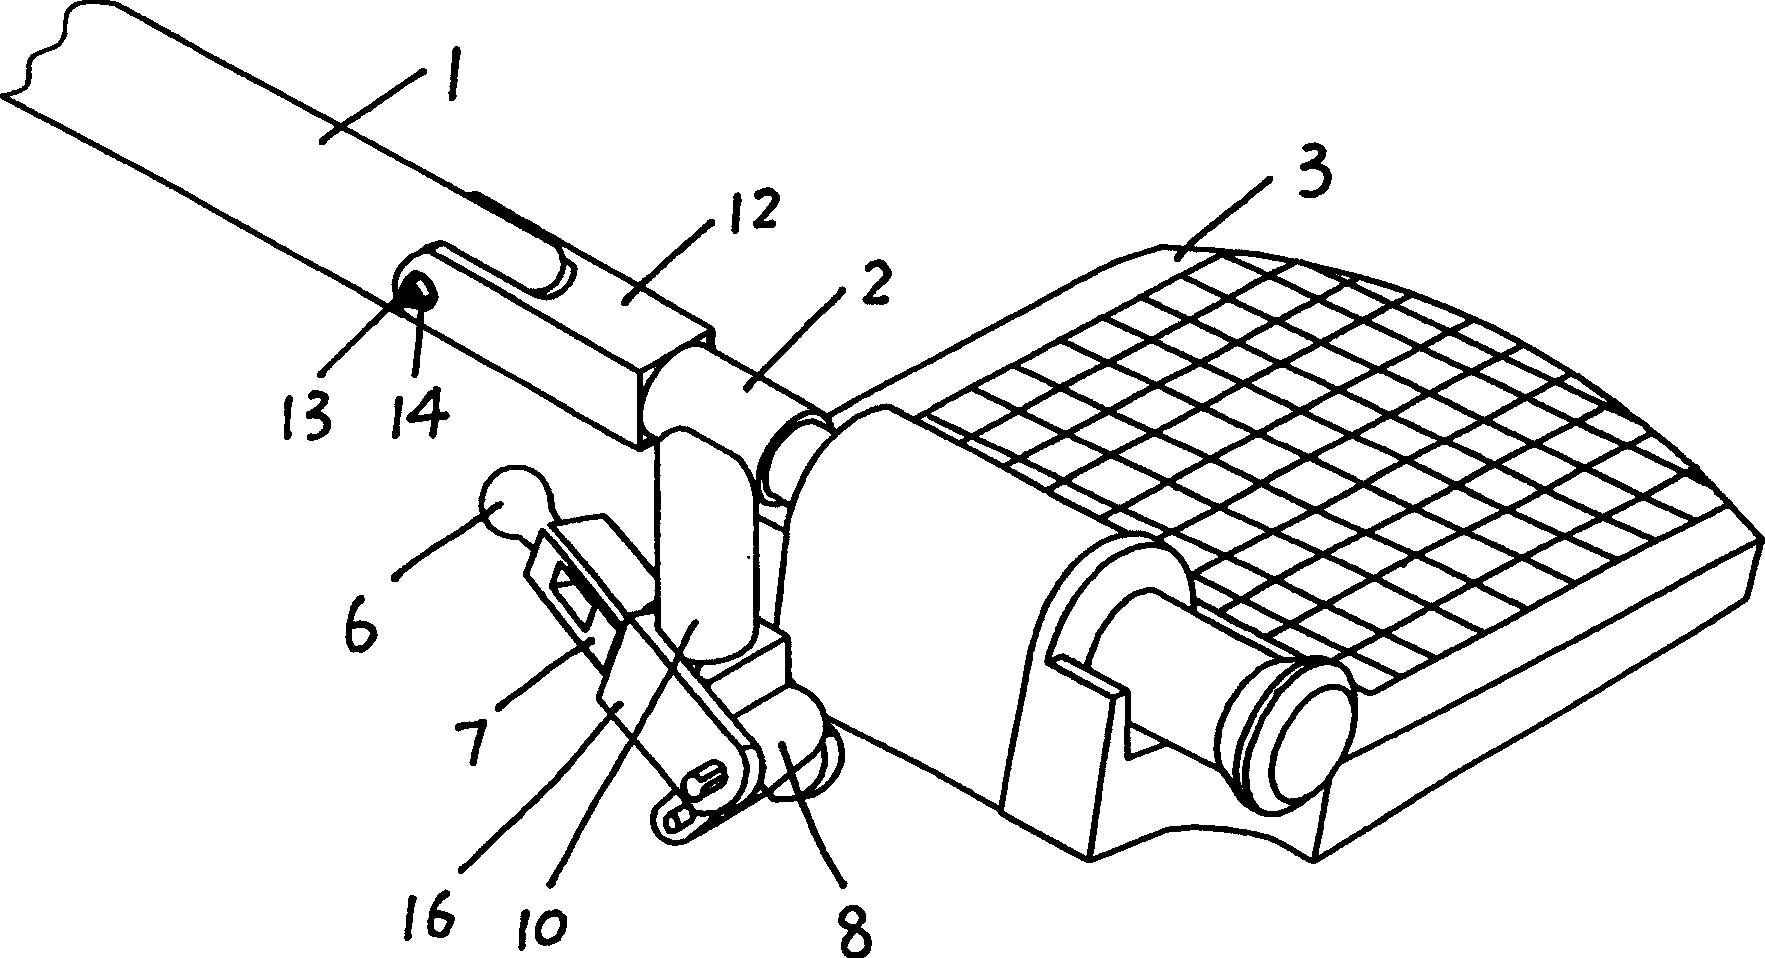 Turn-over adjuster for foot rest of wheel chair